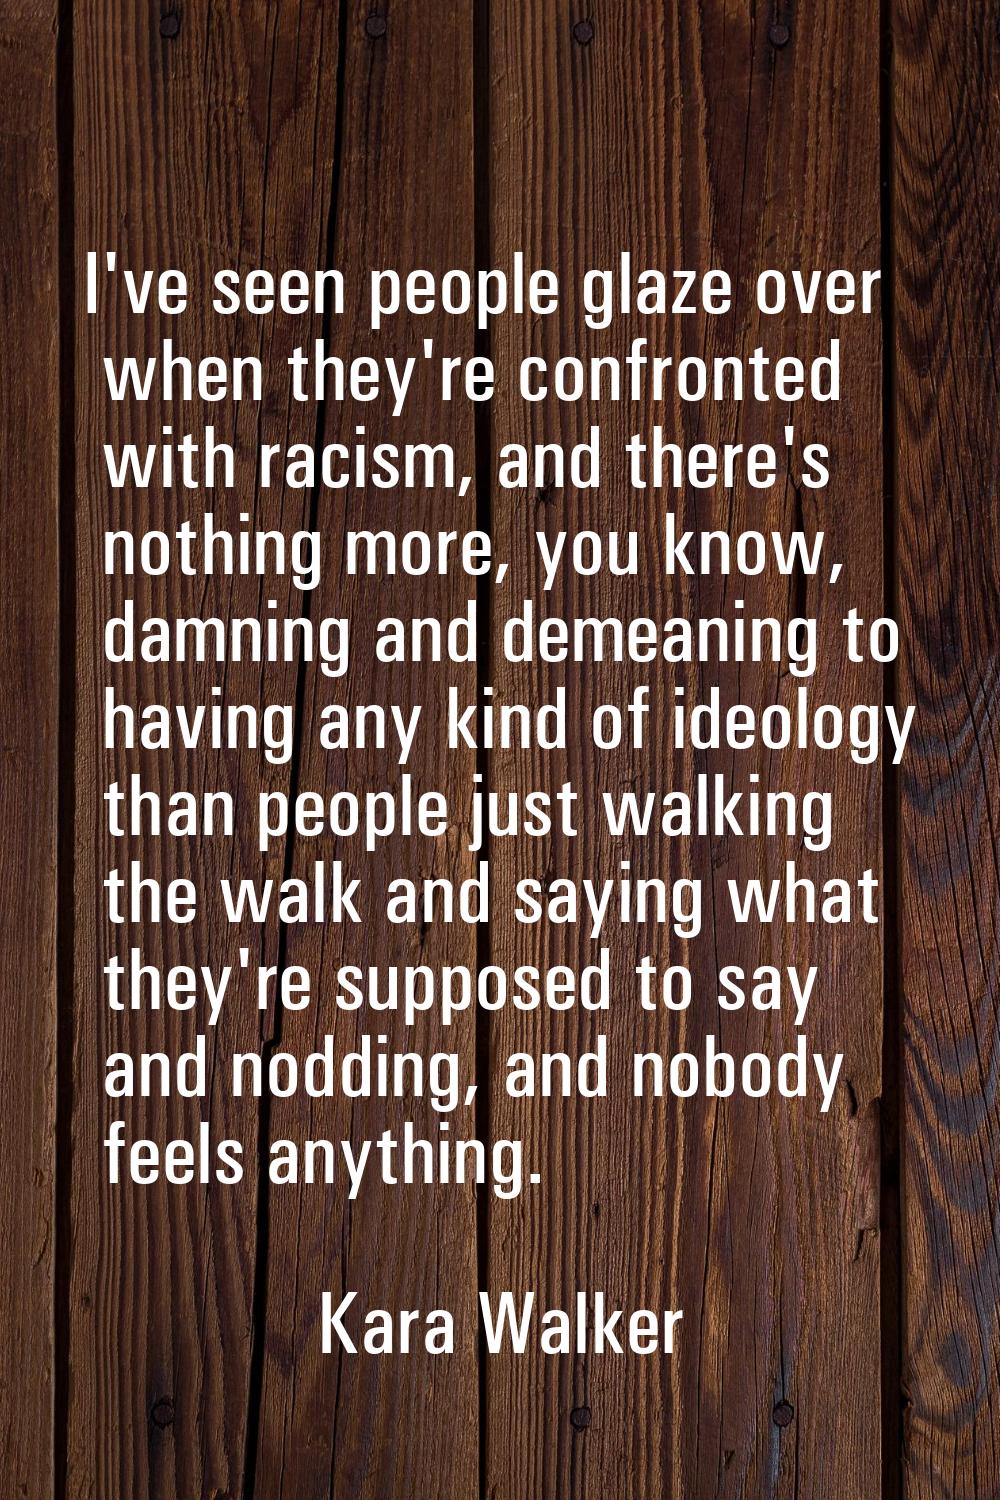 I've seen people glaze over when they're confronted with racism, and there's nothing more, you know